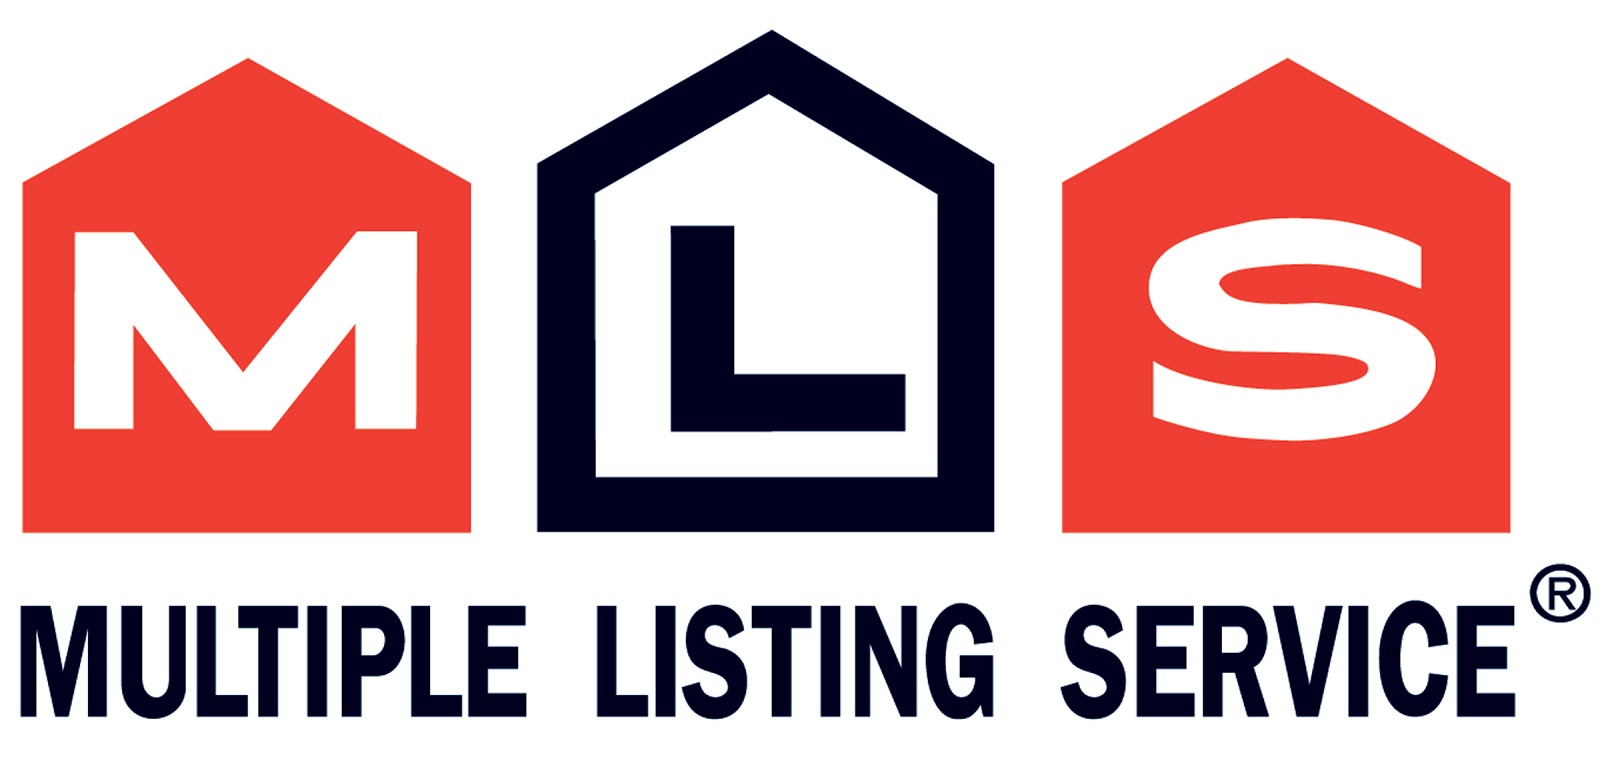 benefits-of-multiple-listing-service-mls-daily-free-news